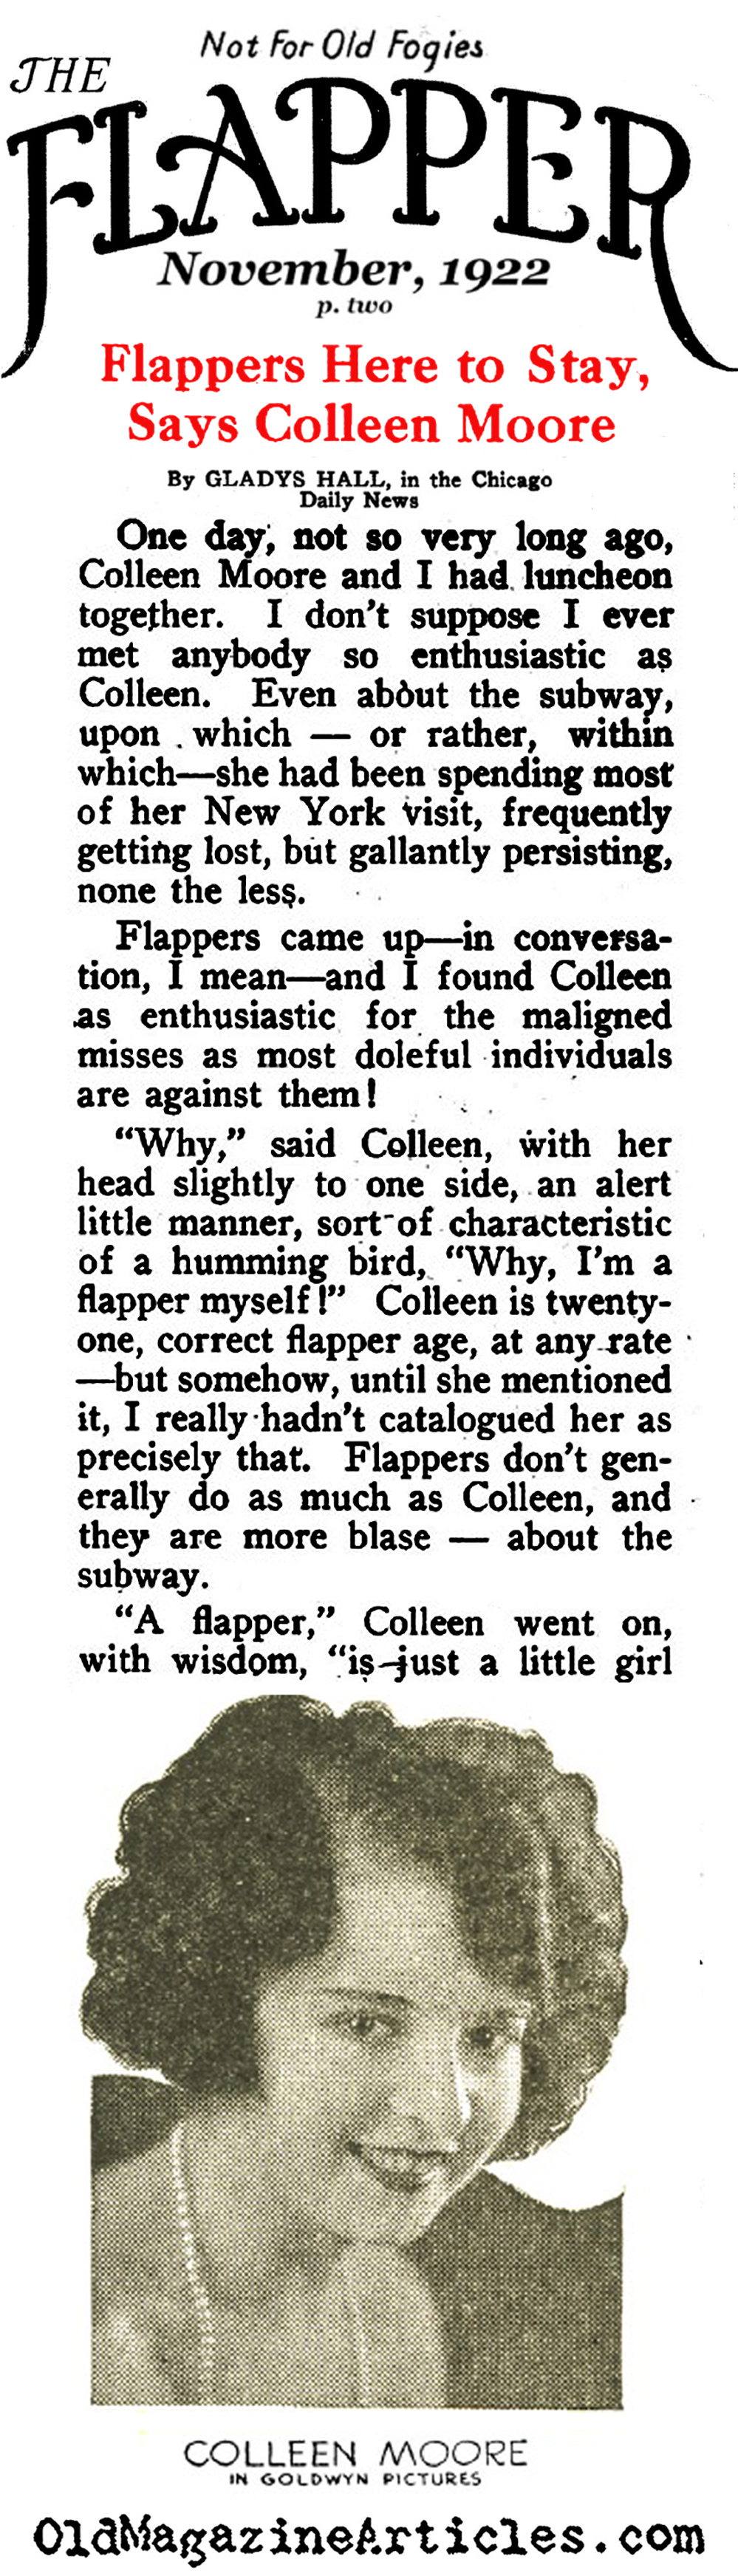 Colleen Moore: A Flapper in Hollywood (Flapper Magazine, 1922)